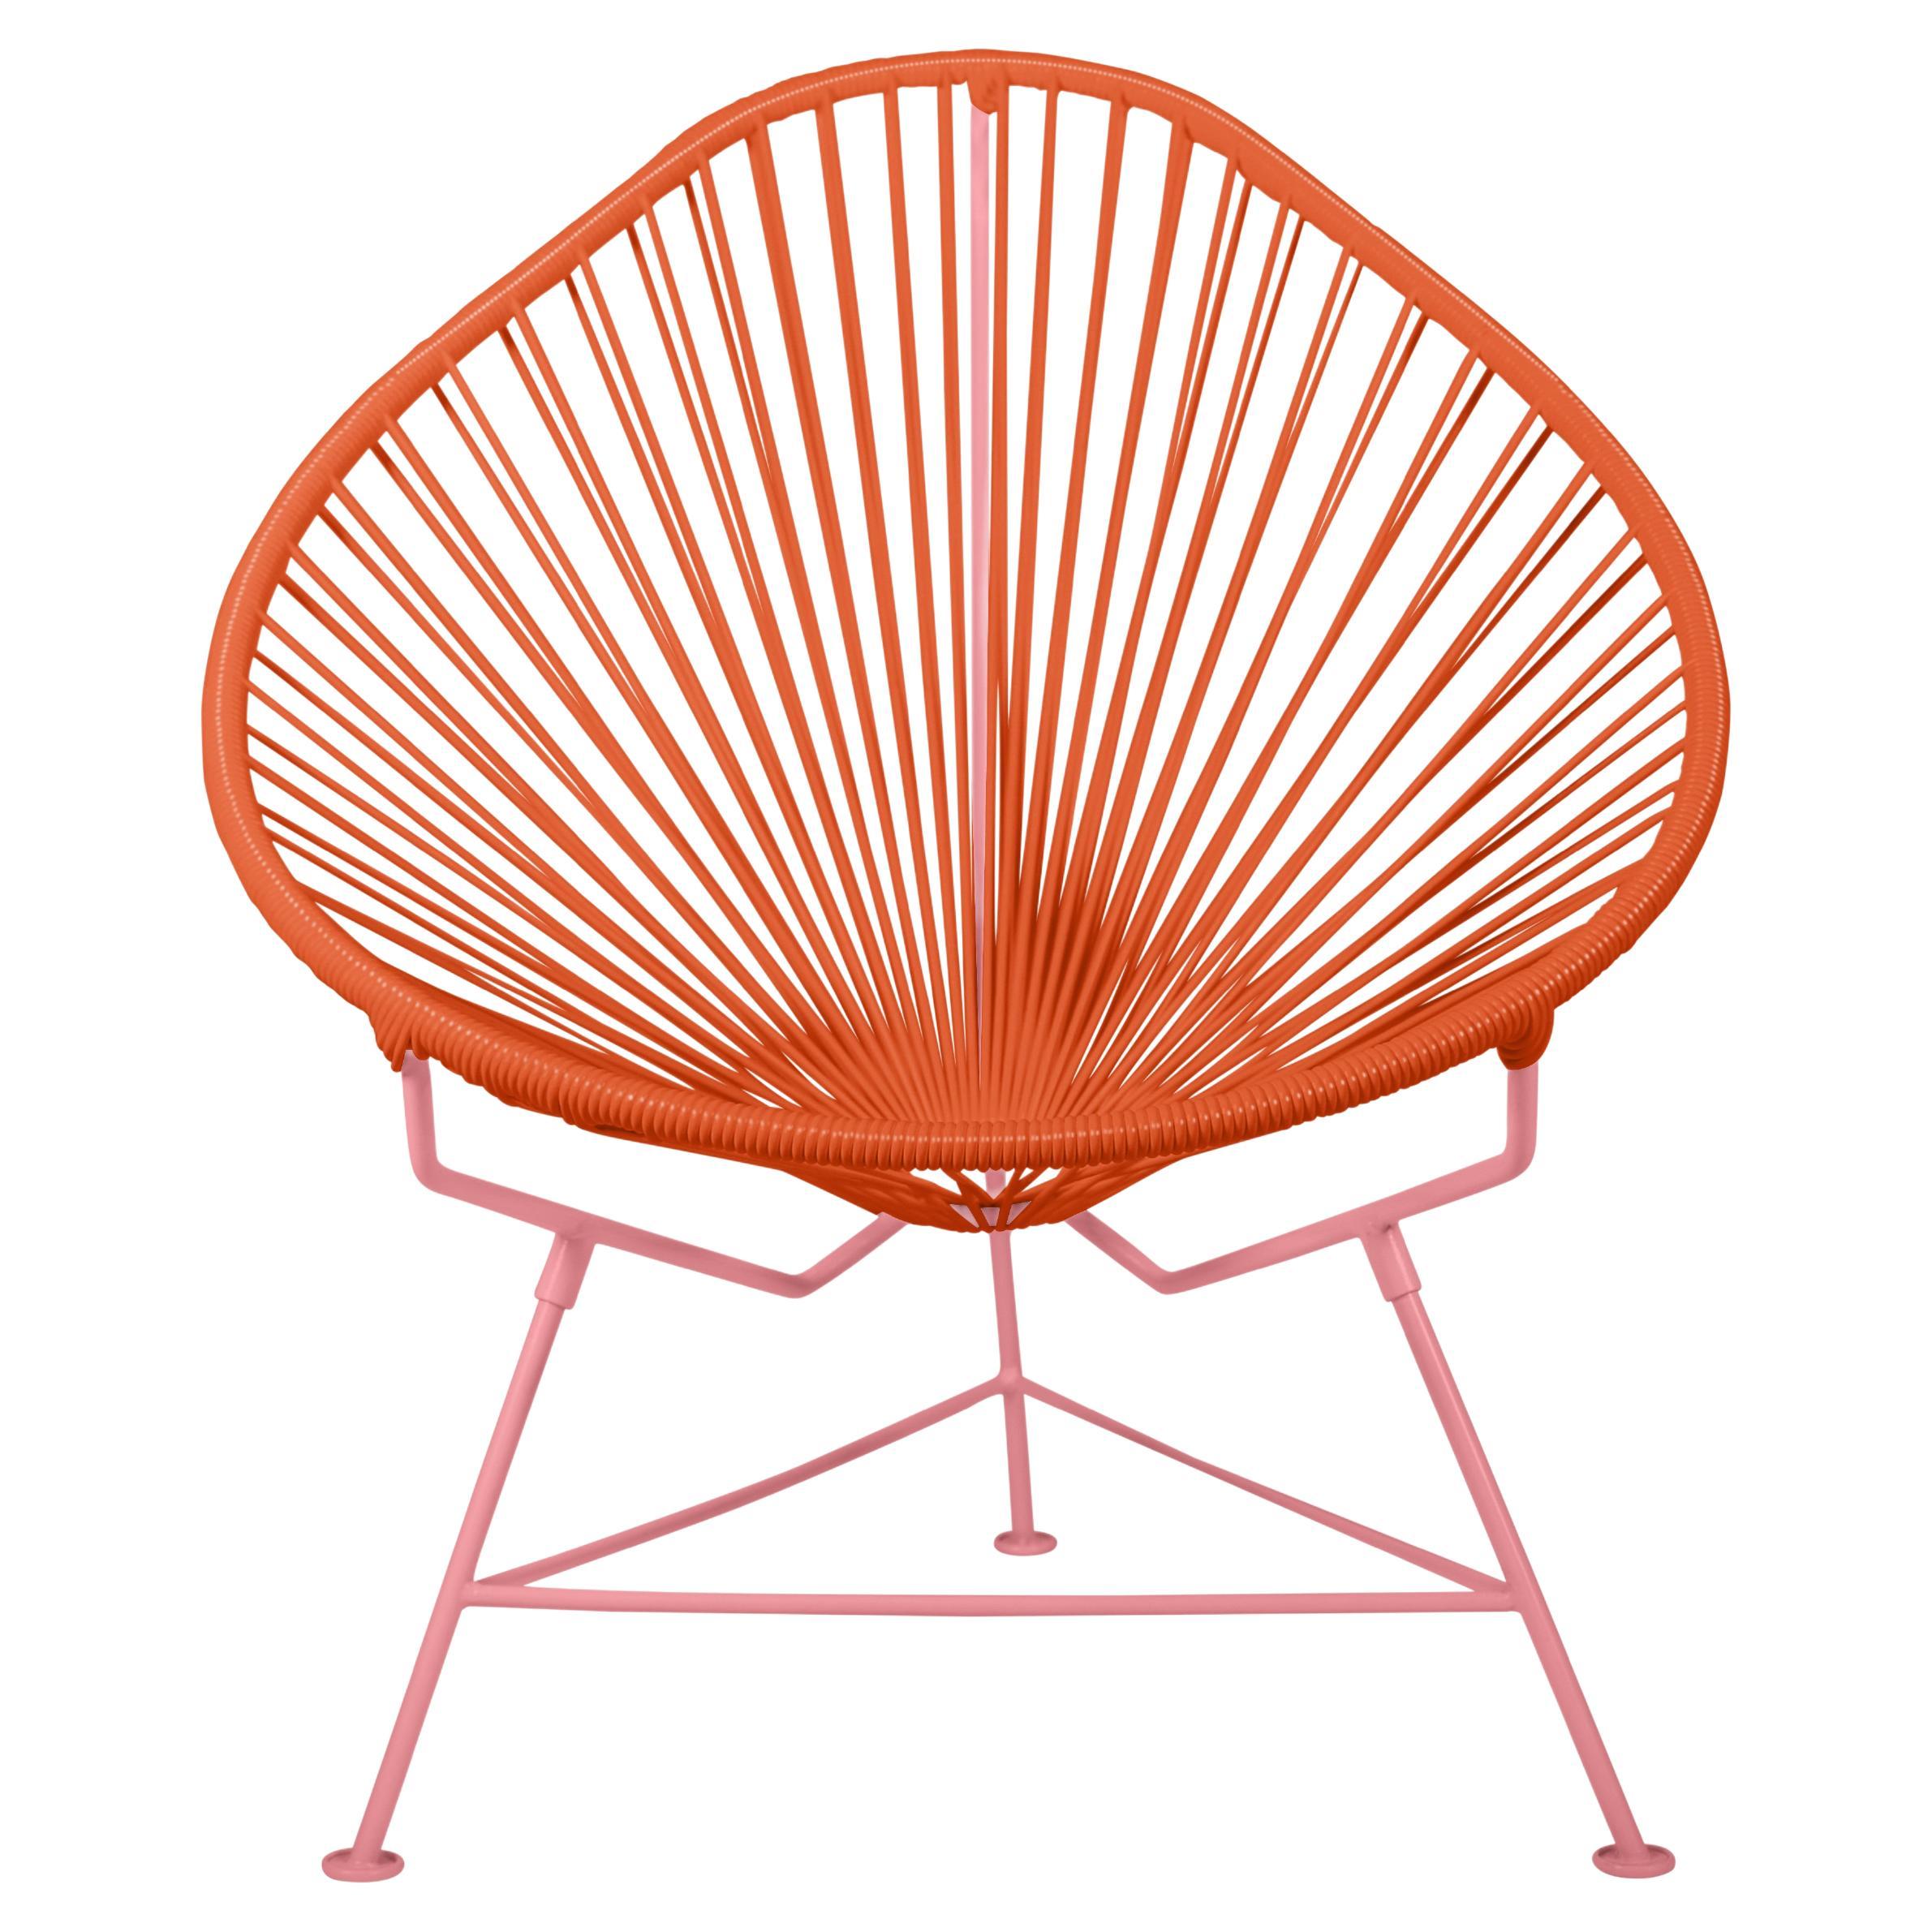 Innit Designs Acapulco Chair Orange Weave on Coral Frame